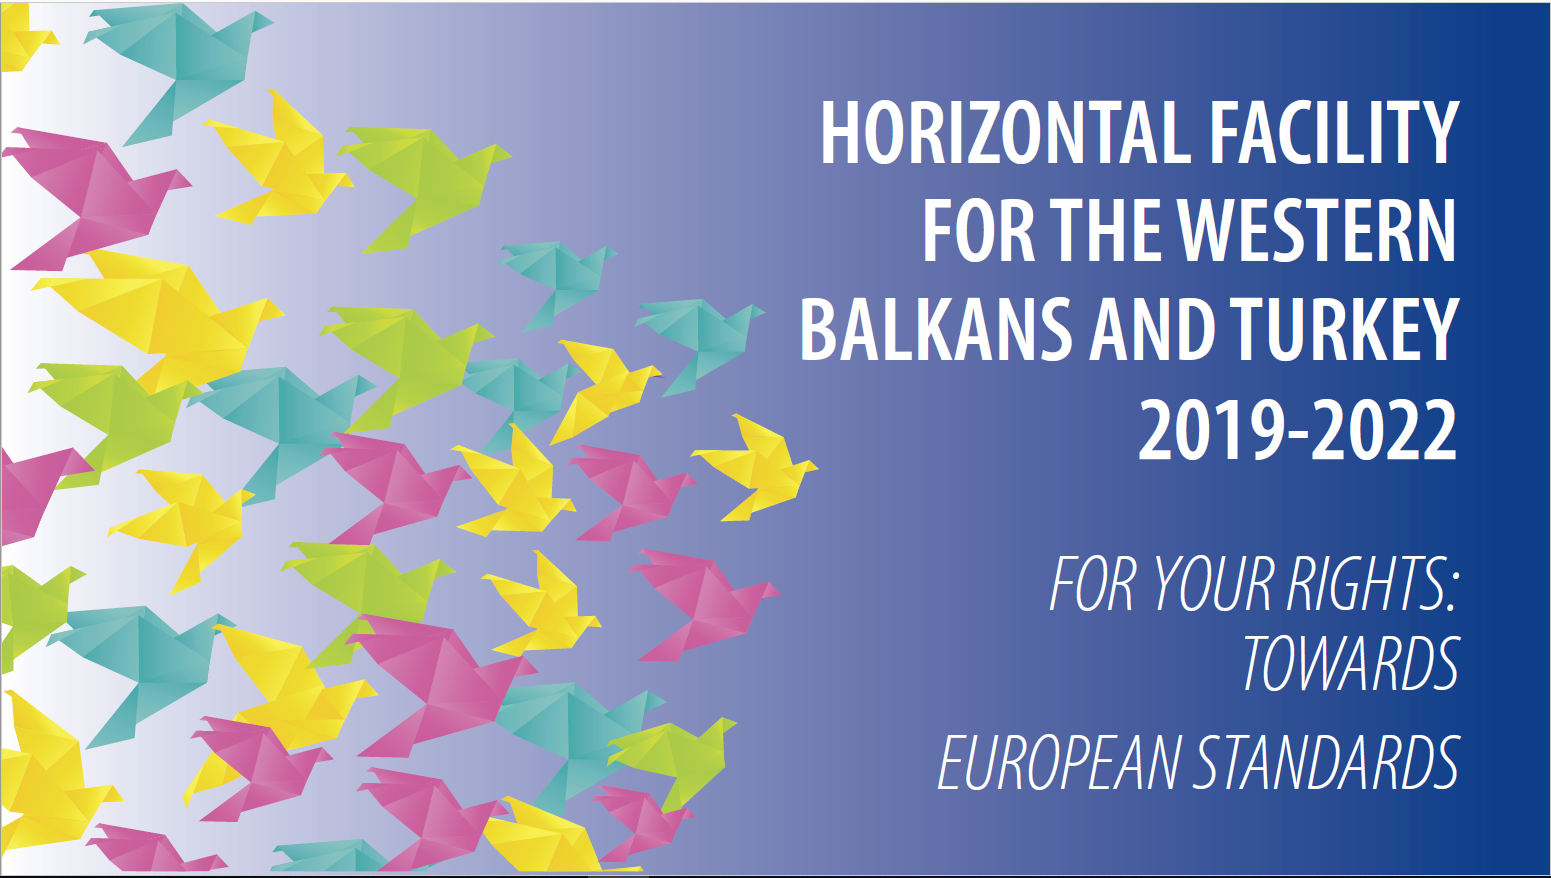 European Union-Council of Europe Horizontal Facility II for the Western Balkans and Turkey (2019-2022)